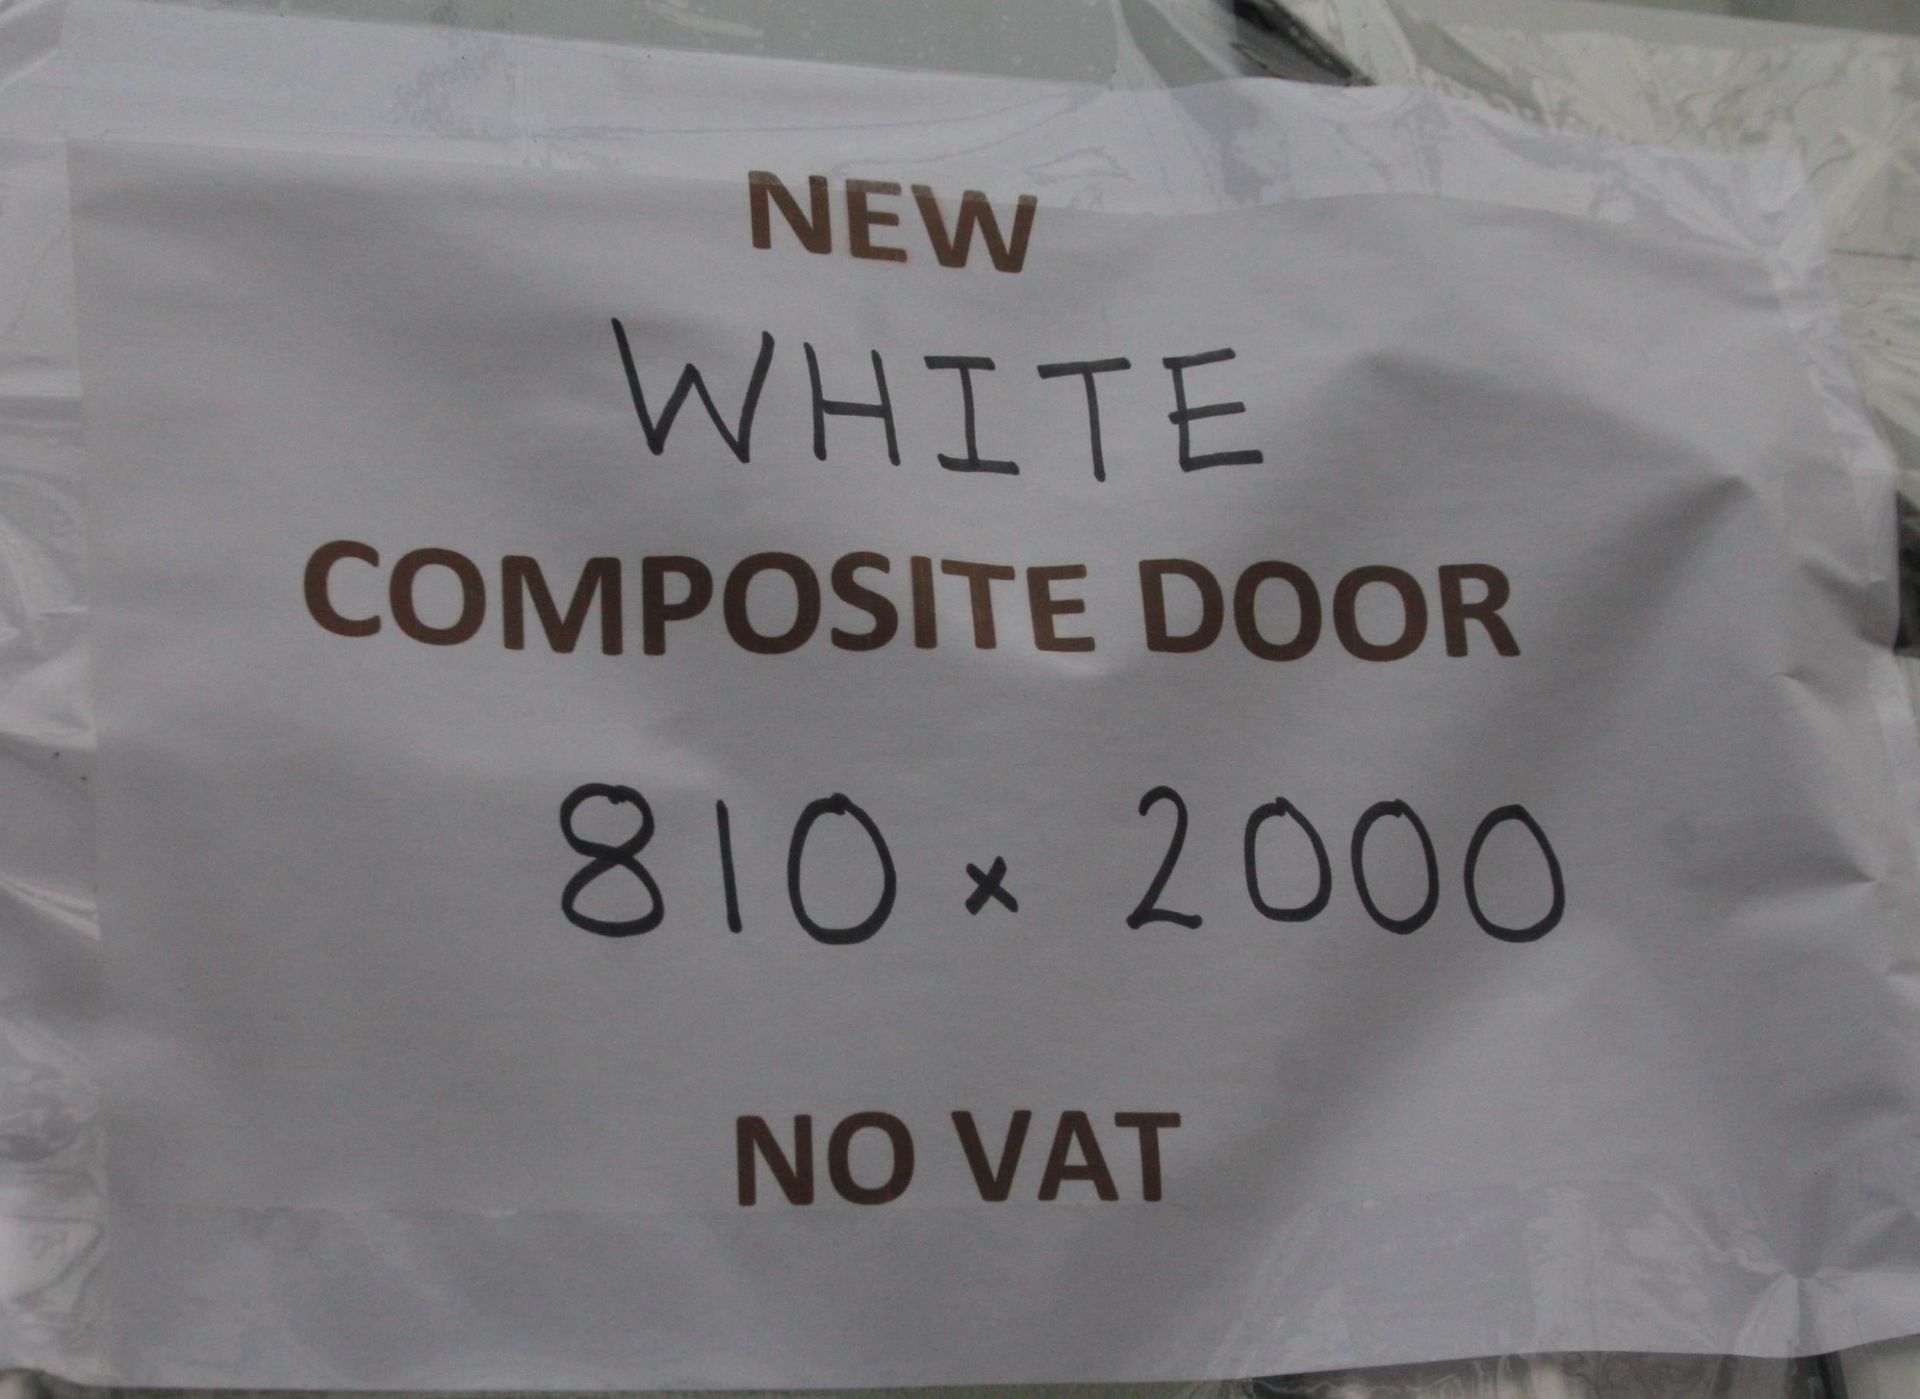 A NEW WHITE COMPOSITE DOOR AND FRAME 810MM X 2000MM LOCK AND KEYS IN LETTERBOX NO VAT - Image 2 of 2